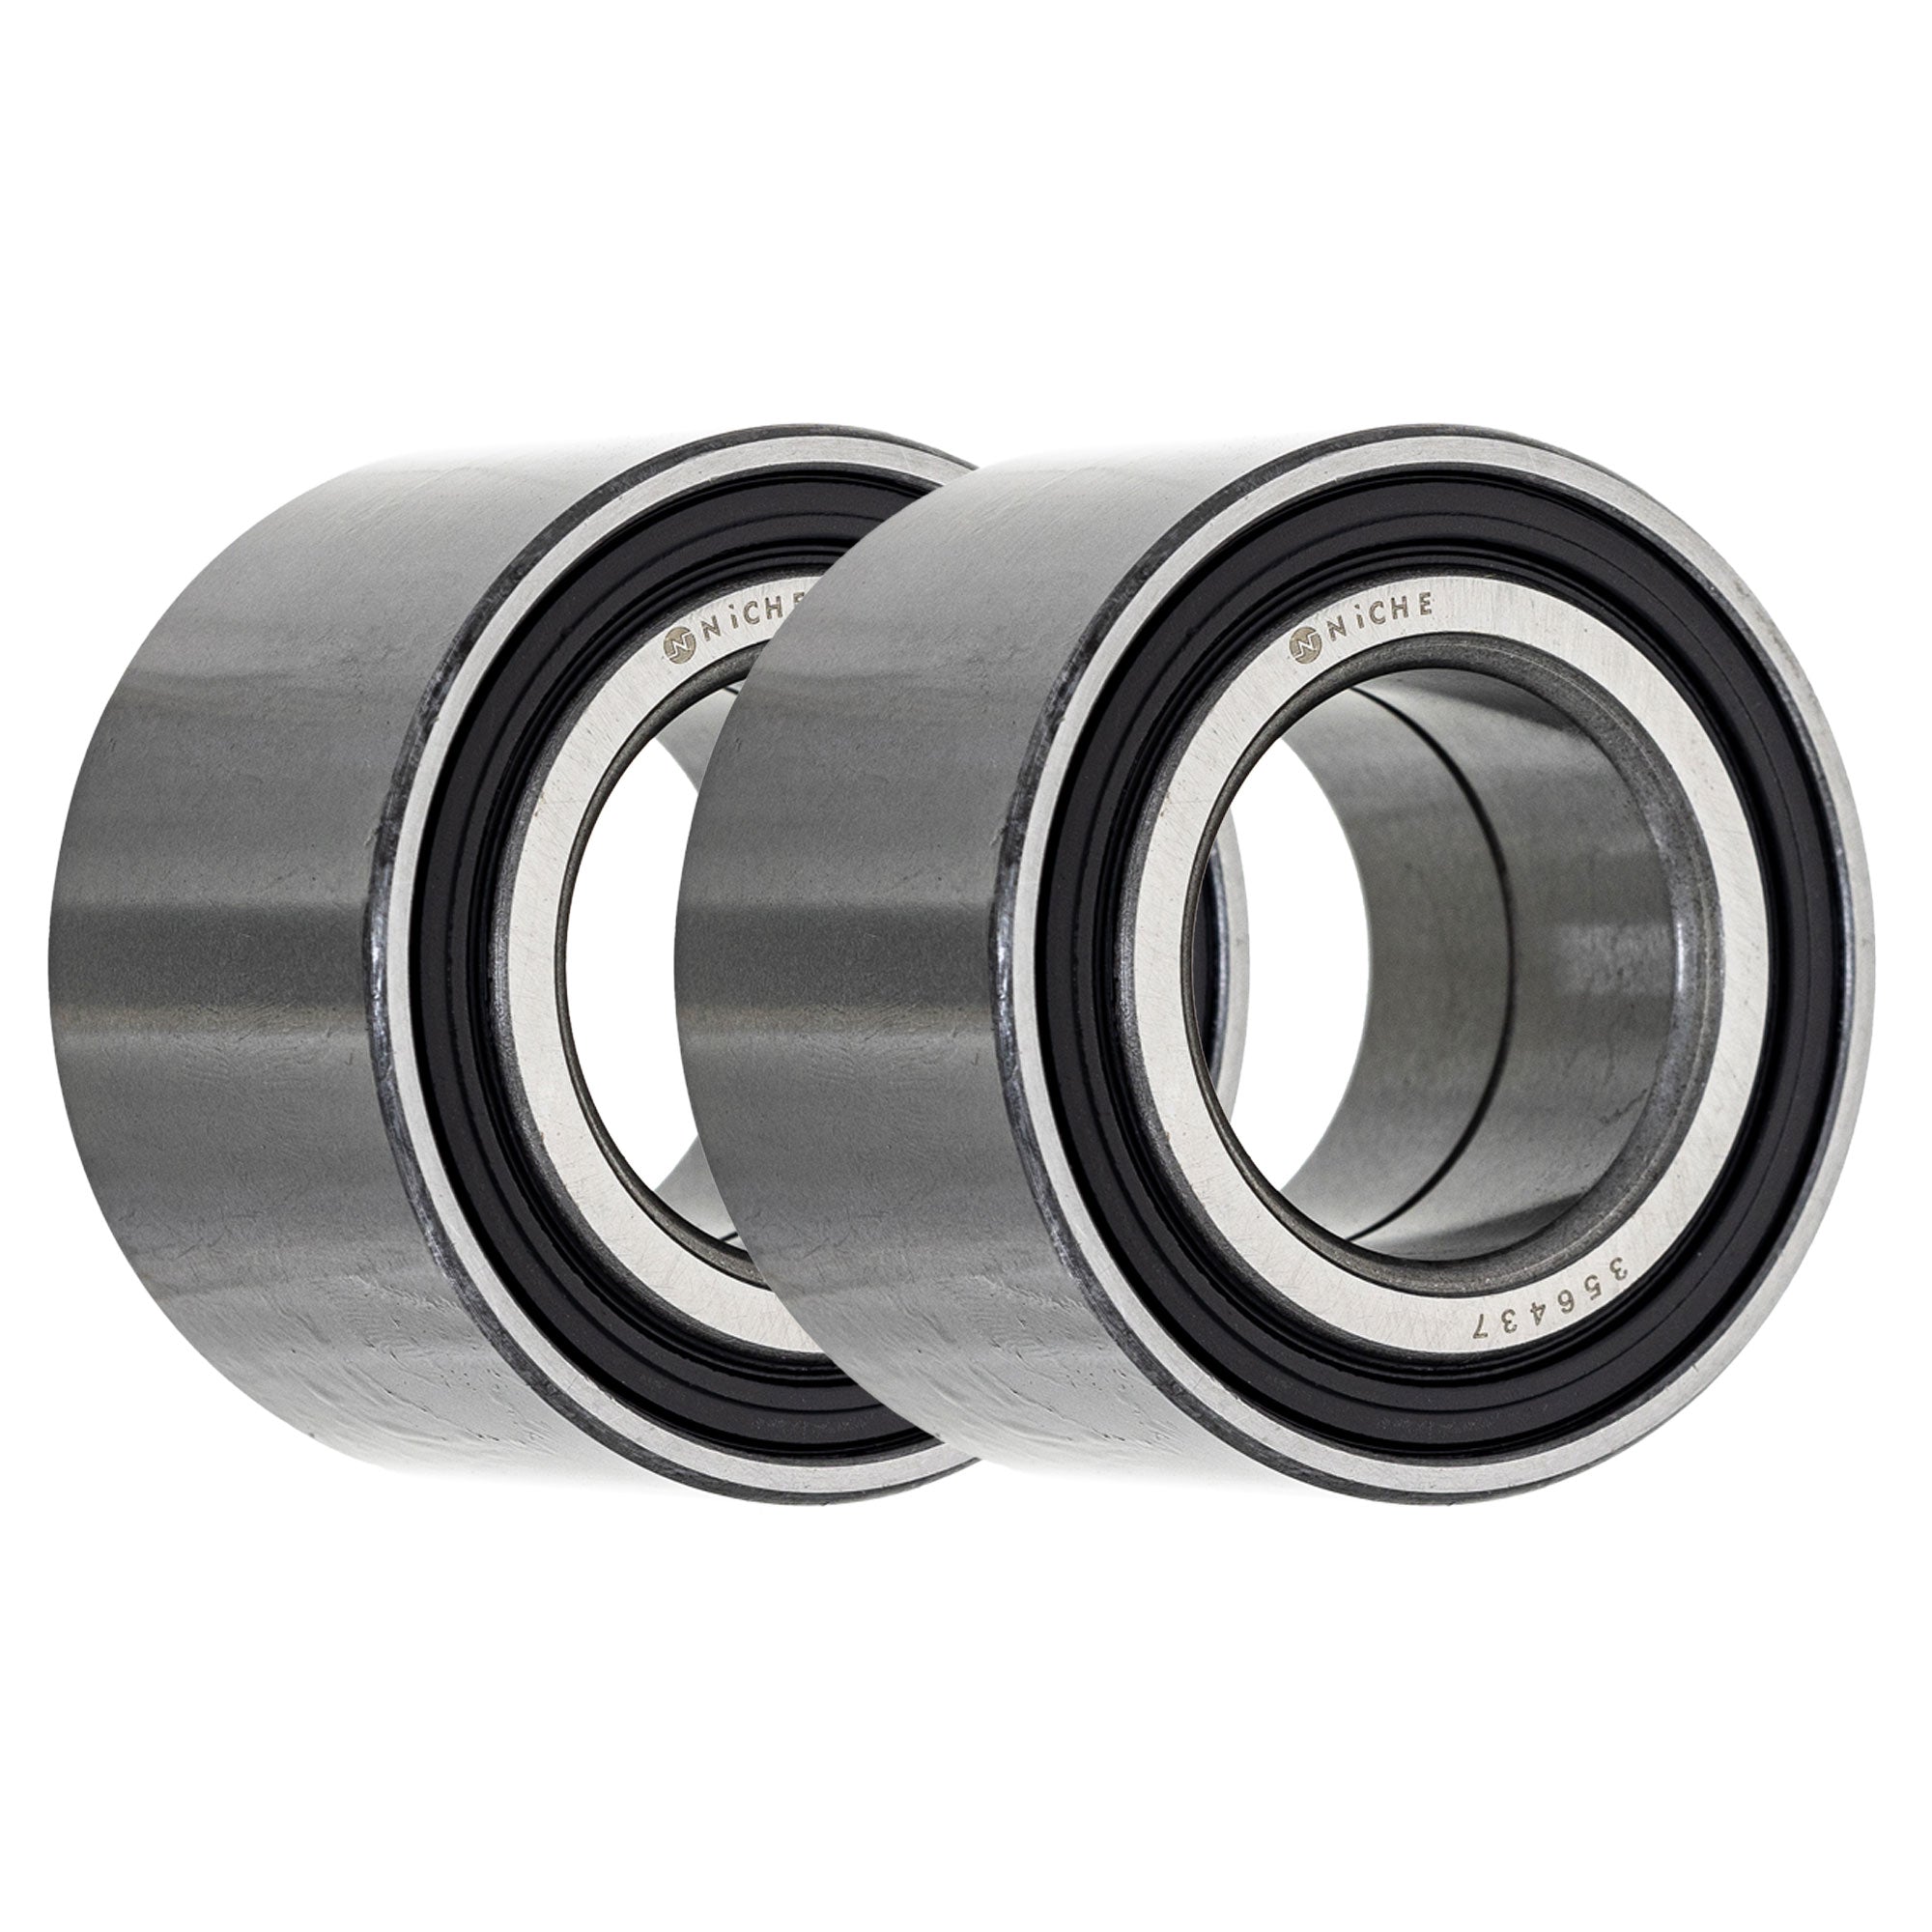 Double Row, Angular Contact, Ball Bearing Pack of 2 2-Pack for zOTHER GEM Trail-Blazer NICHE 519-CBB2283R